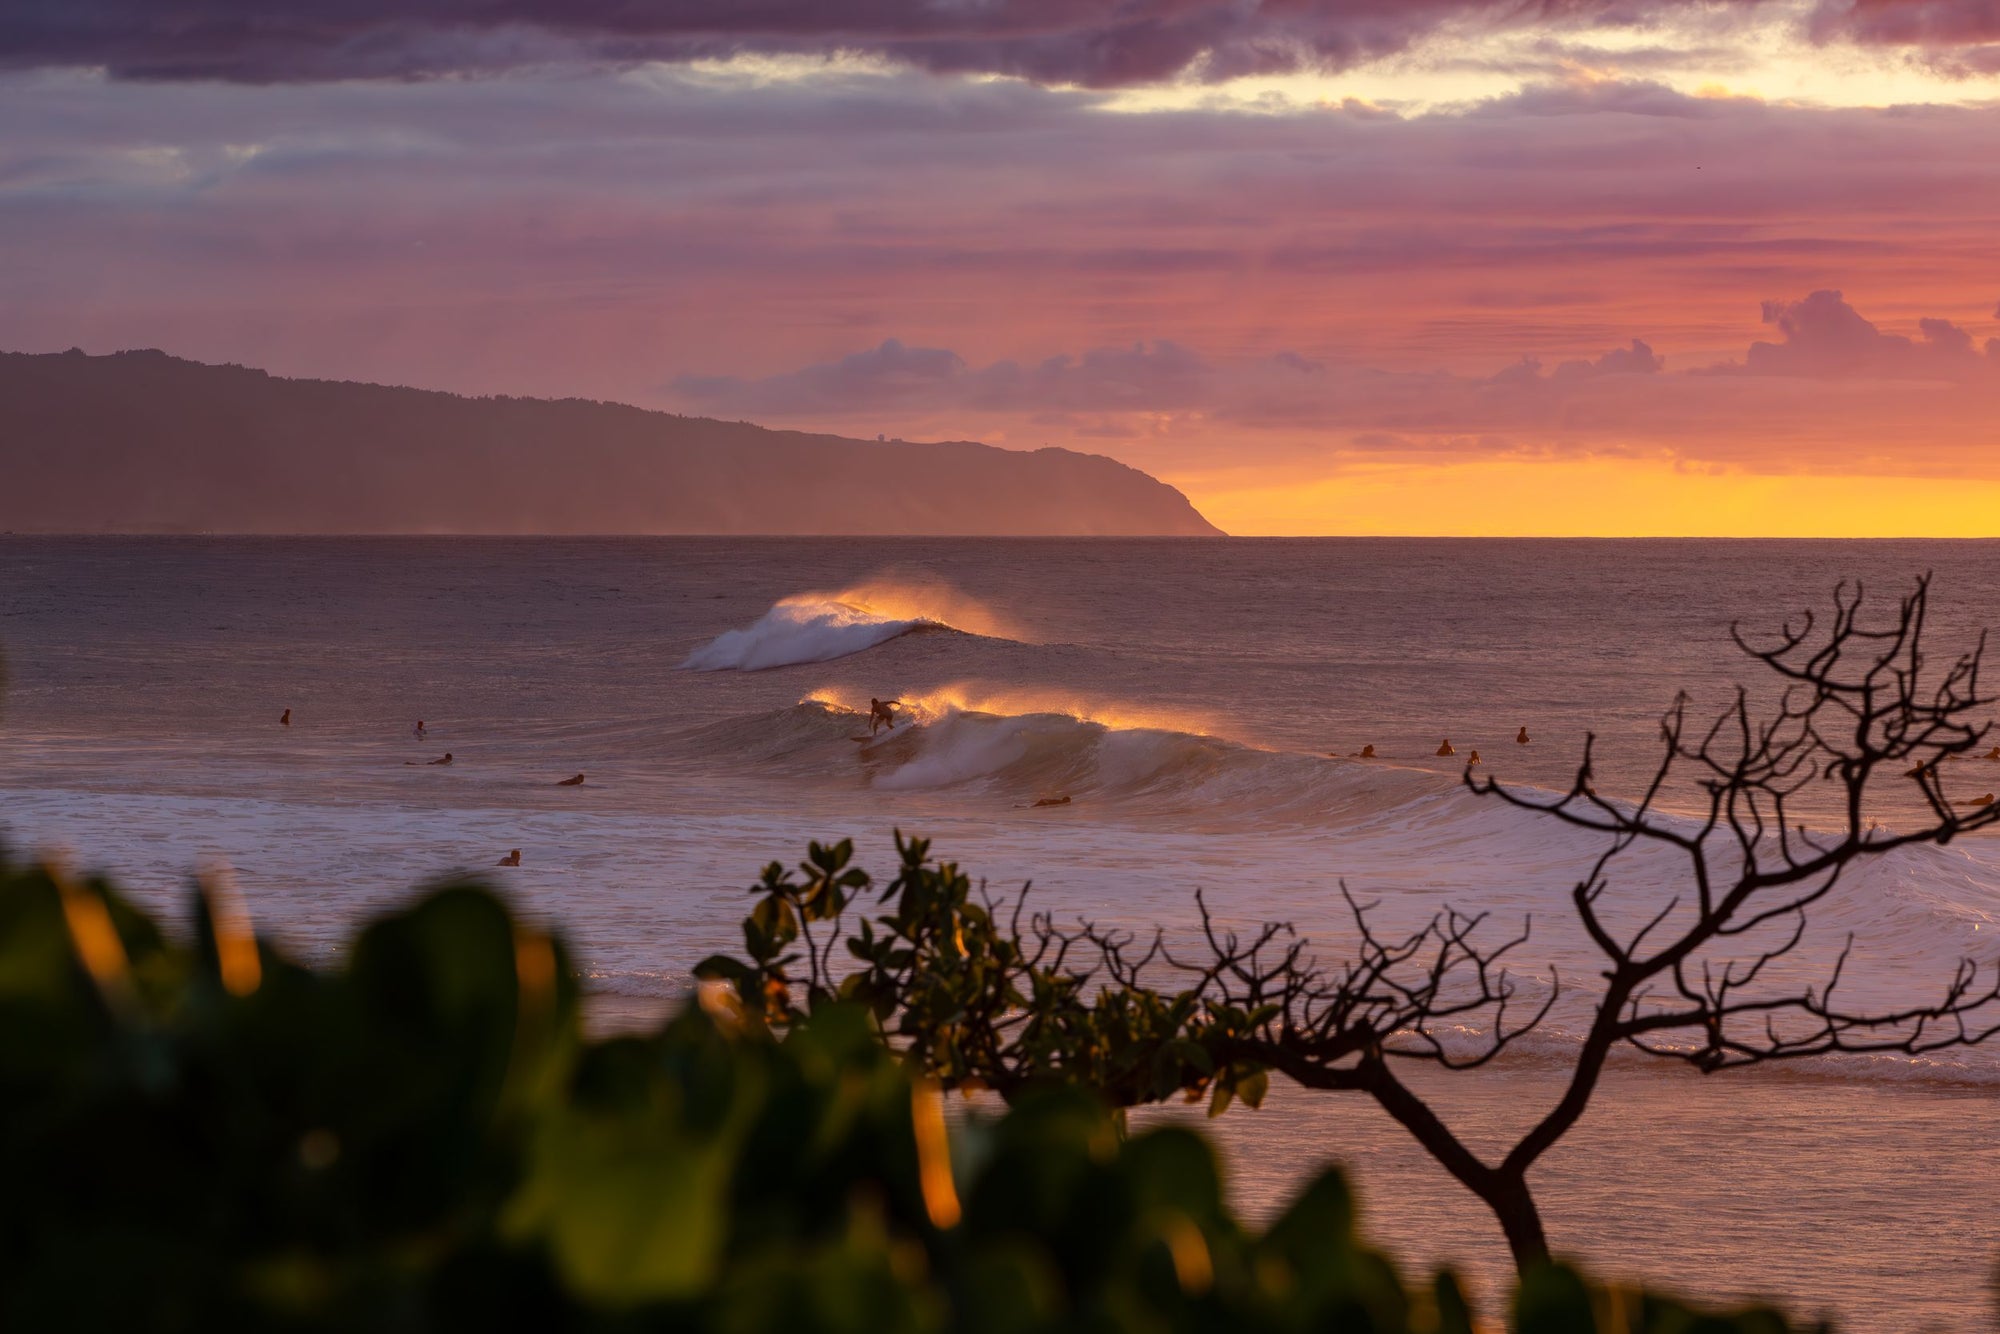 A sunset colored with pinks, oranges and purples highlight surfers on the North Shore of Oahu.